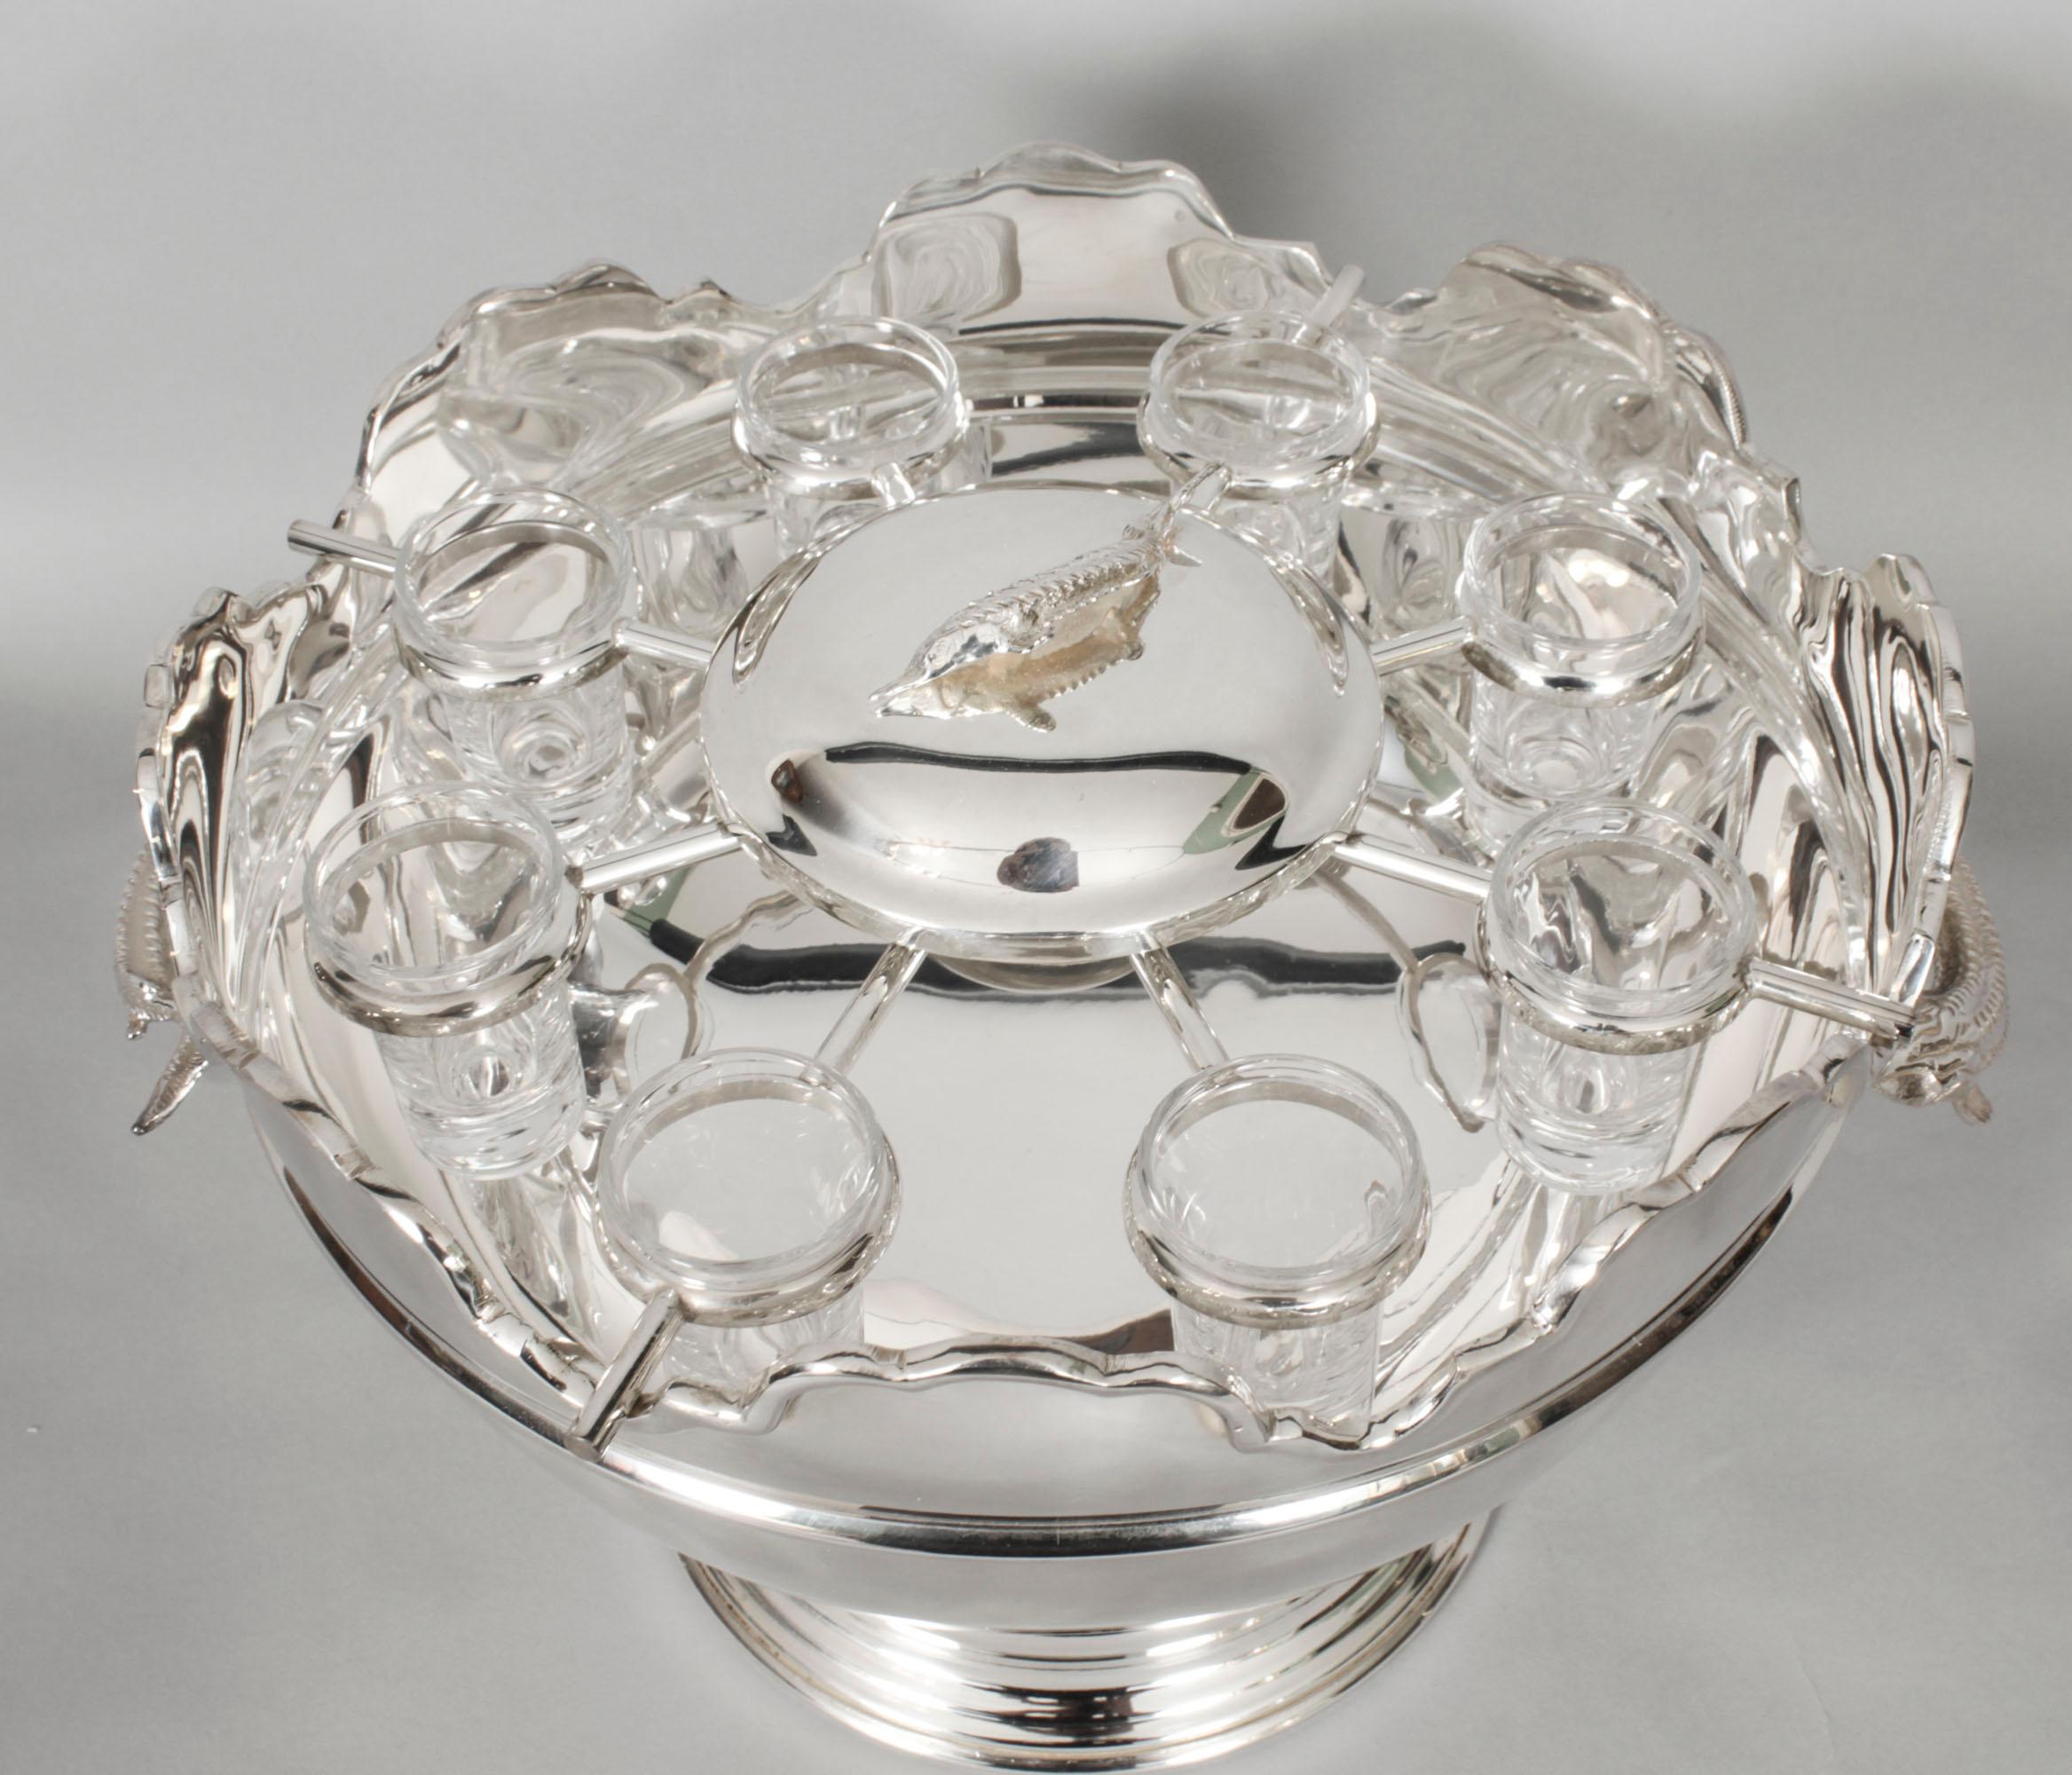 This is a gorgeous  Vintage silver plated Monteith caviar set with a caviar dish and cover in the centre and eight vodka shot glasses around it, dating from the second half of the 20th Century.

It has decorative silver plated sturgeon handles with